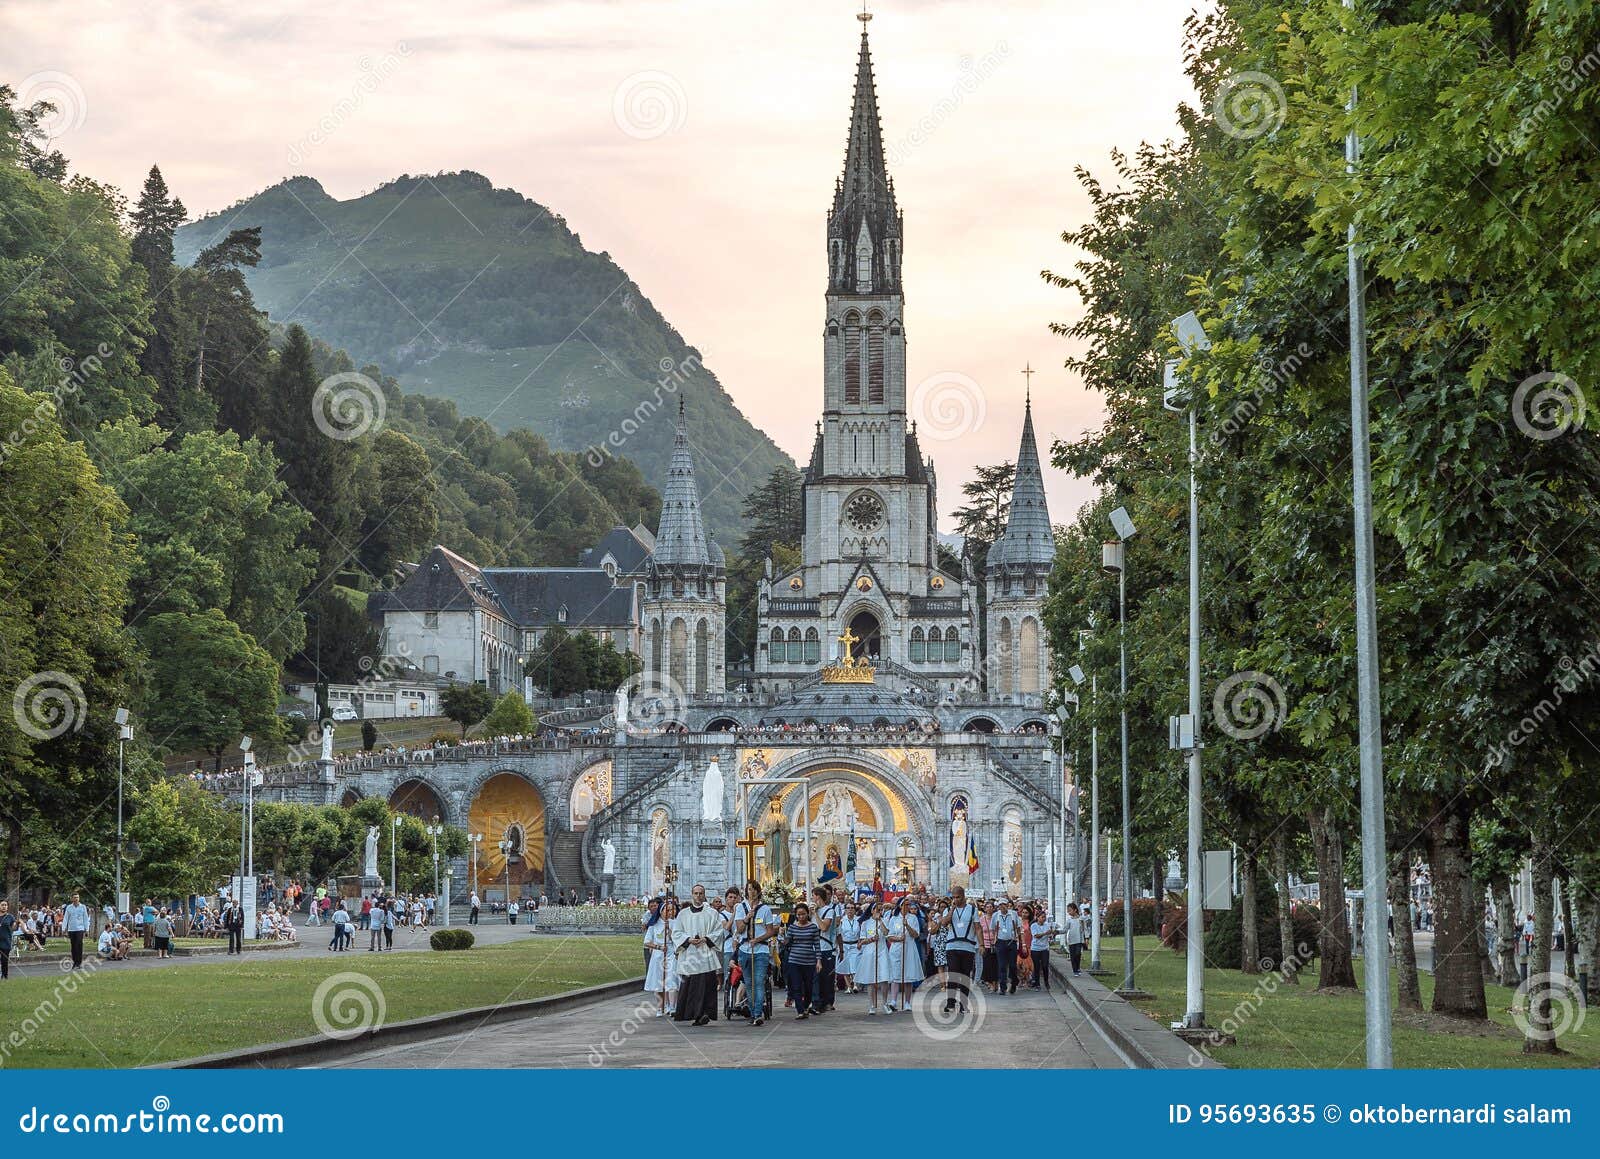 Lourdes candle procession editorial image. Image of main - 95693635